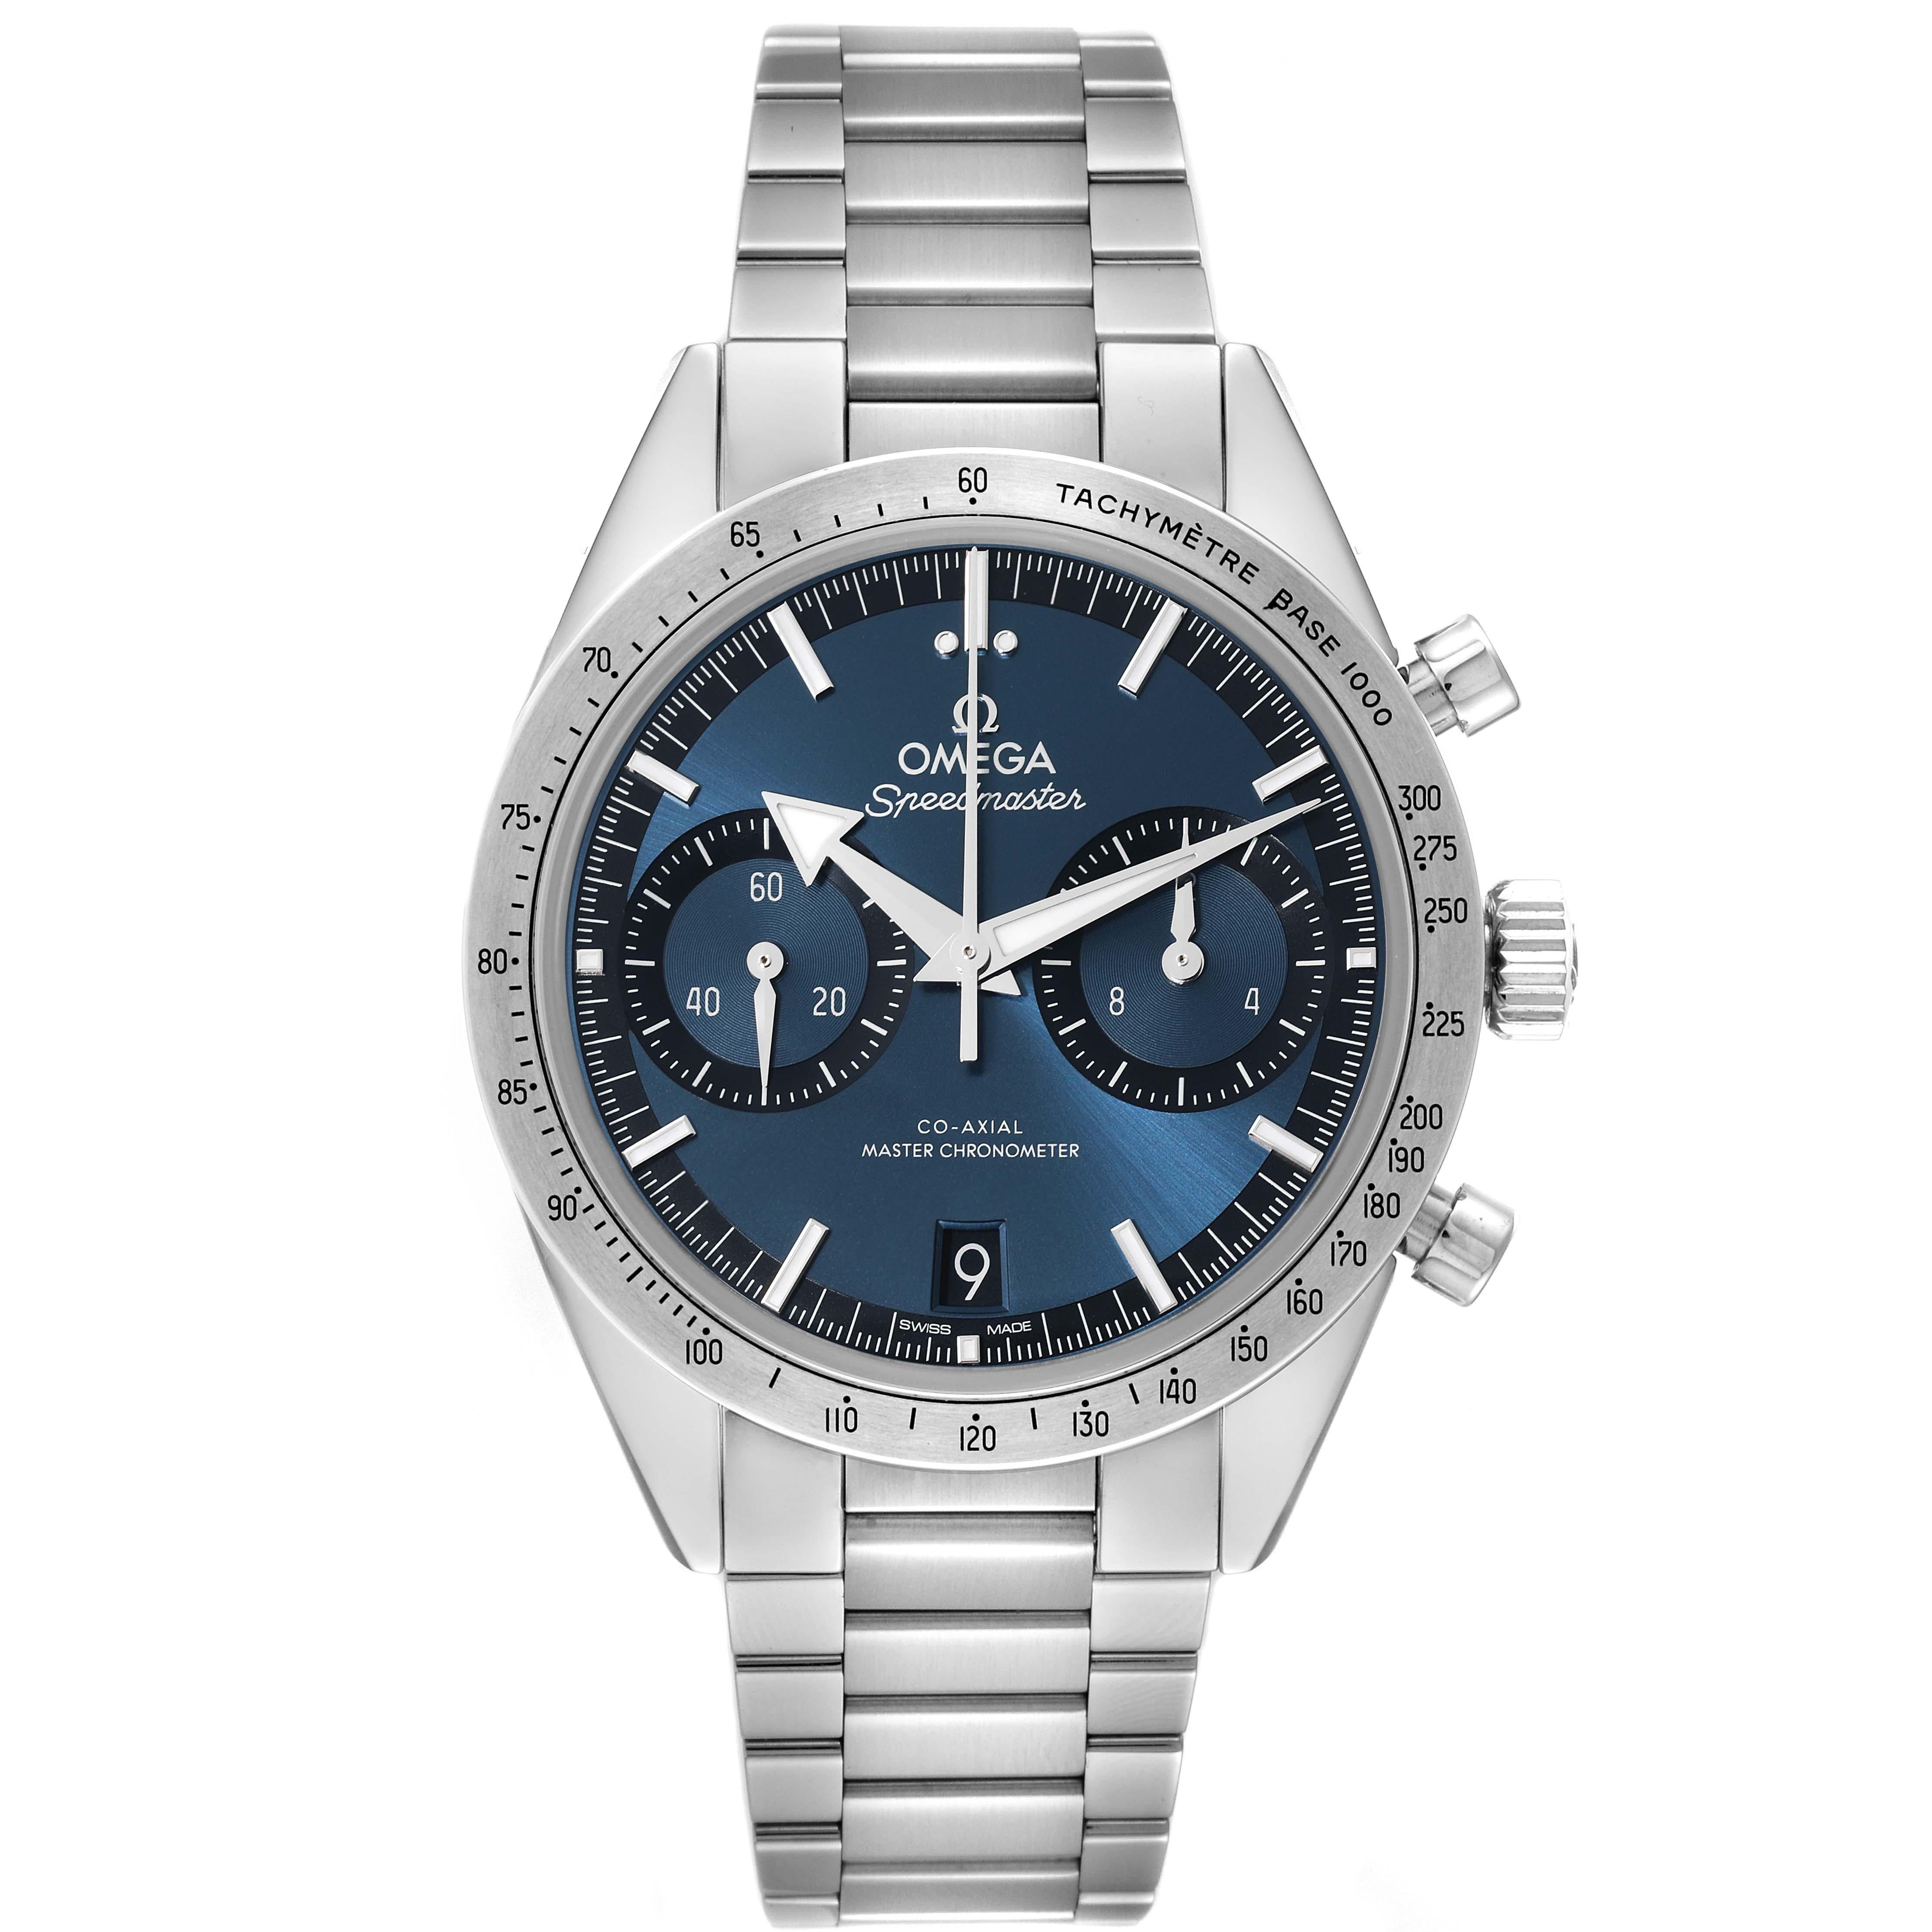 Omega Speedmaster 57 Broad Arrow Steel Mens Watch 332.10.41.51.03.001 Unworn. Officially certified chronometer automatic self-winding chronograph movement. Column wheel mechanism and Co-Axial escapement. Silicon balance-spring on free